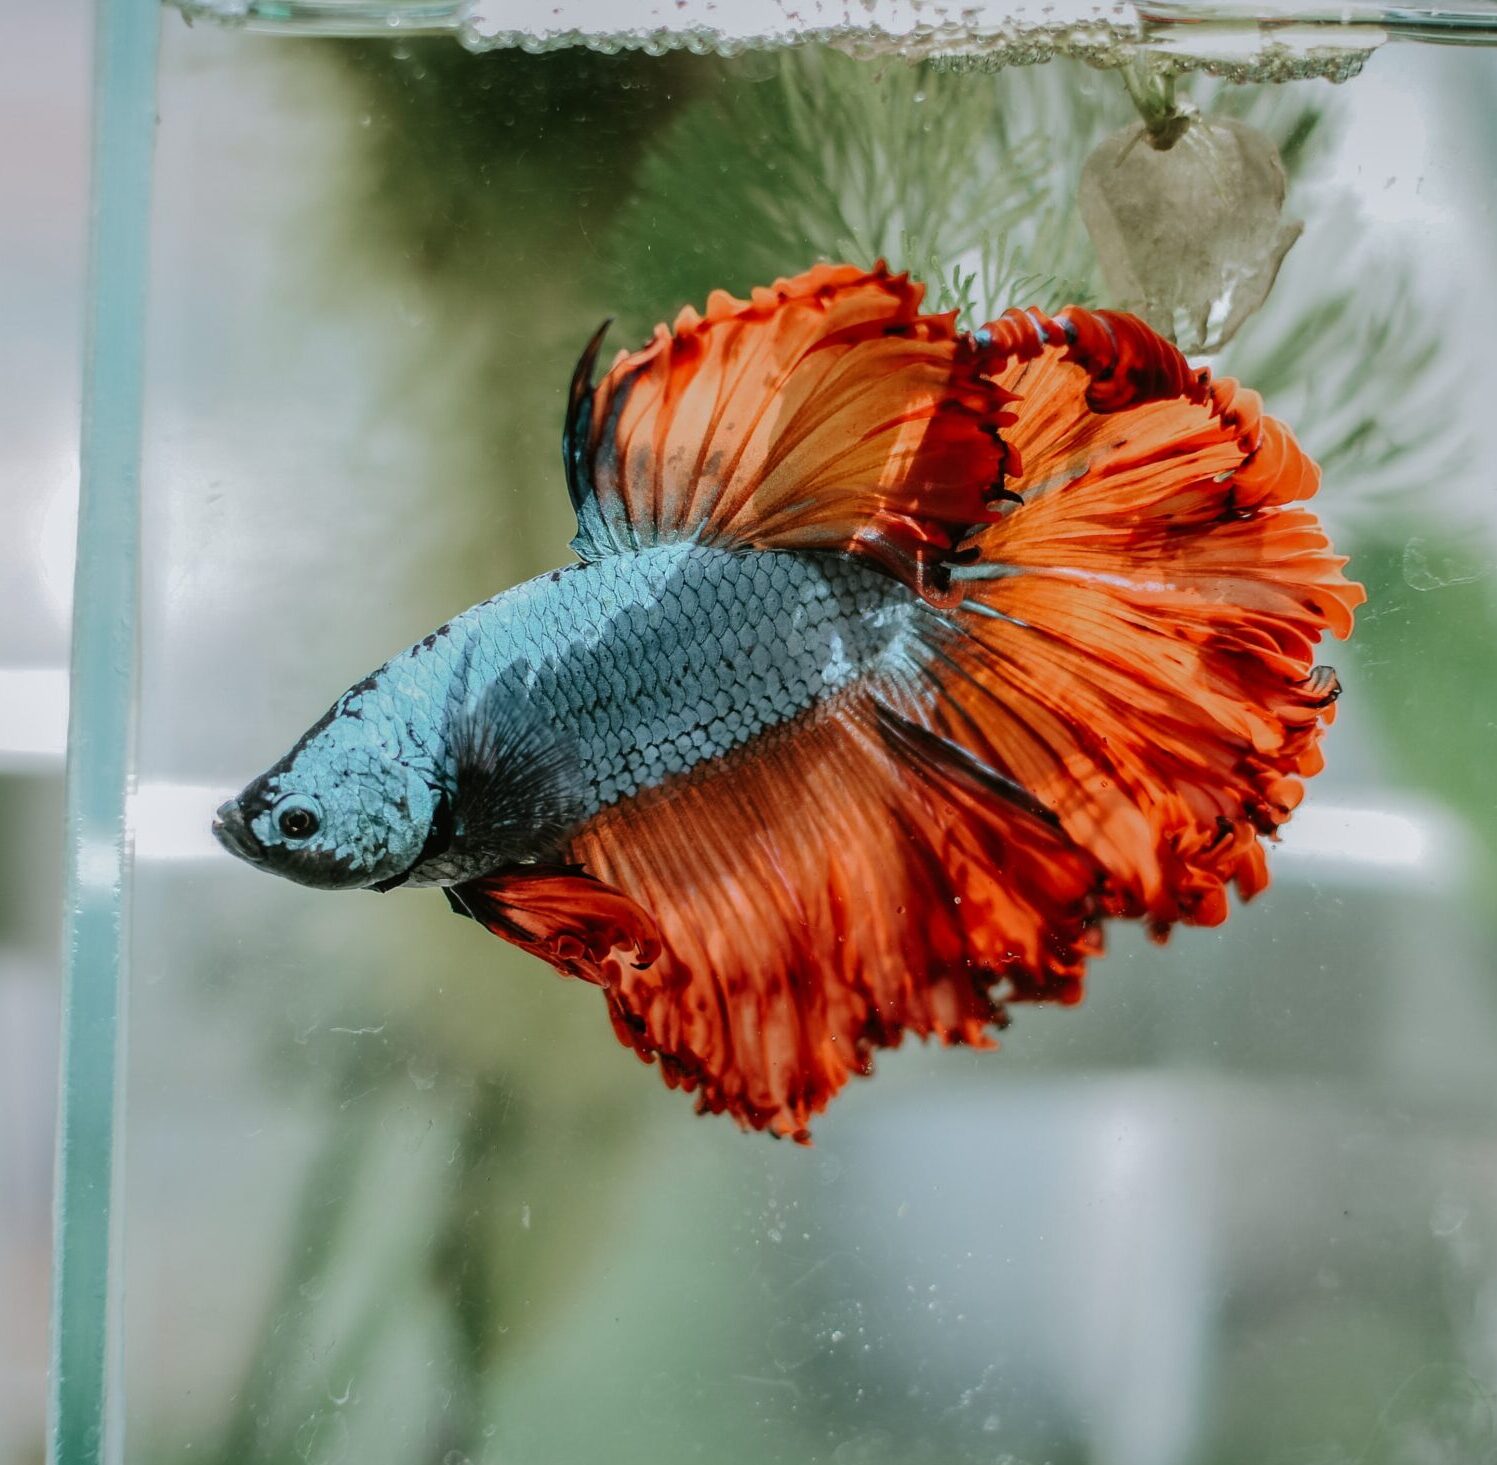 Setup and care of your betta fish